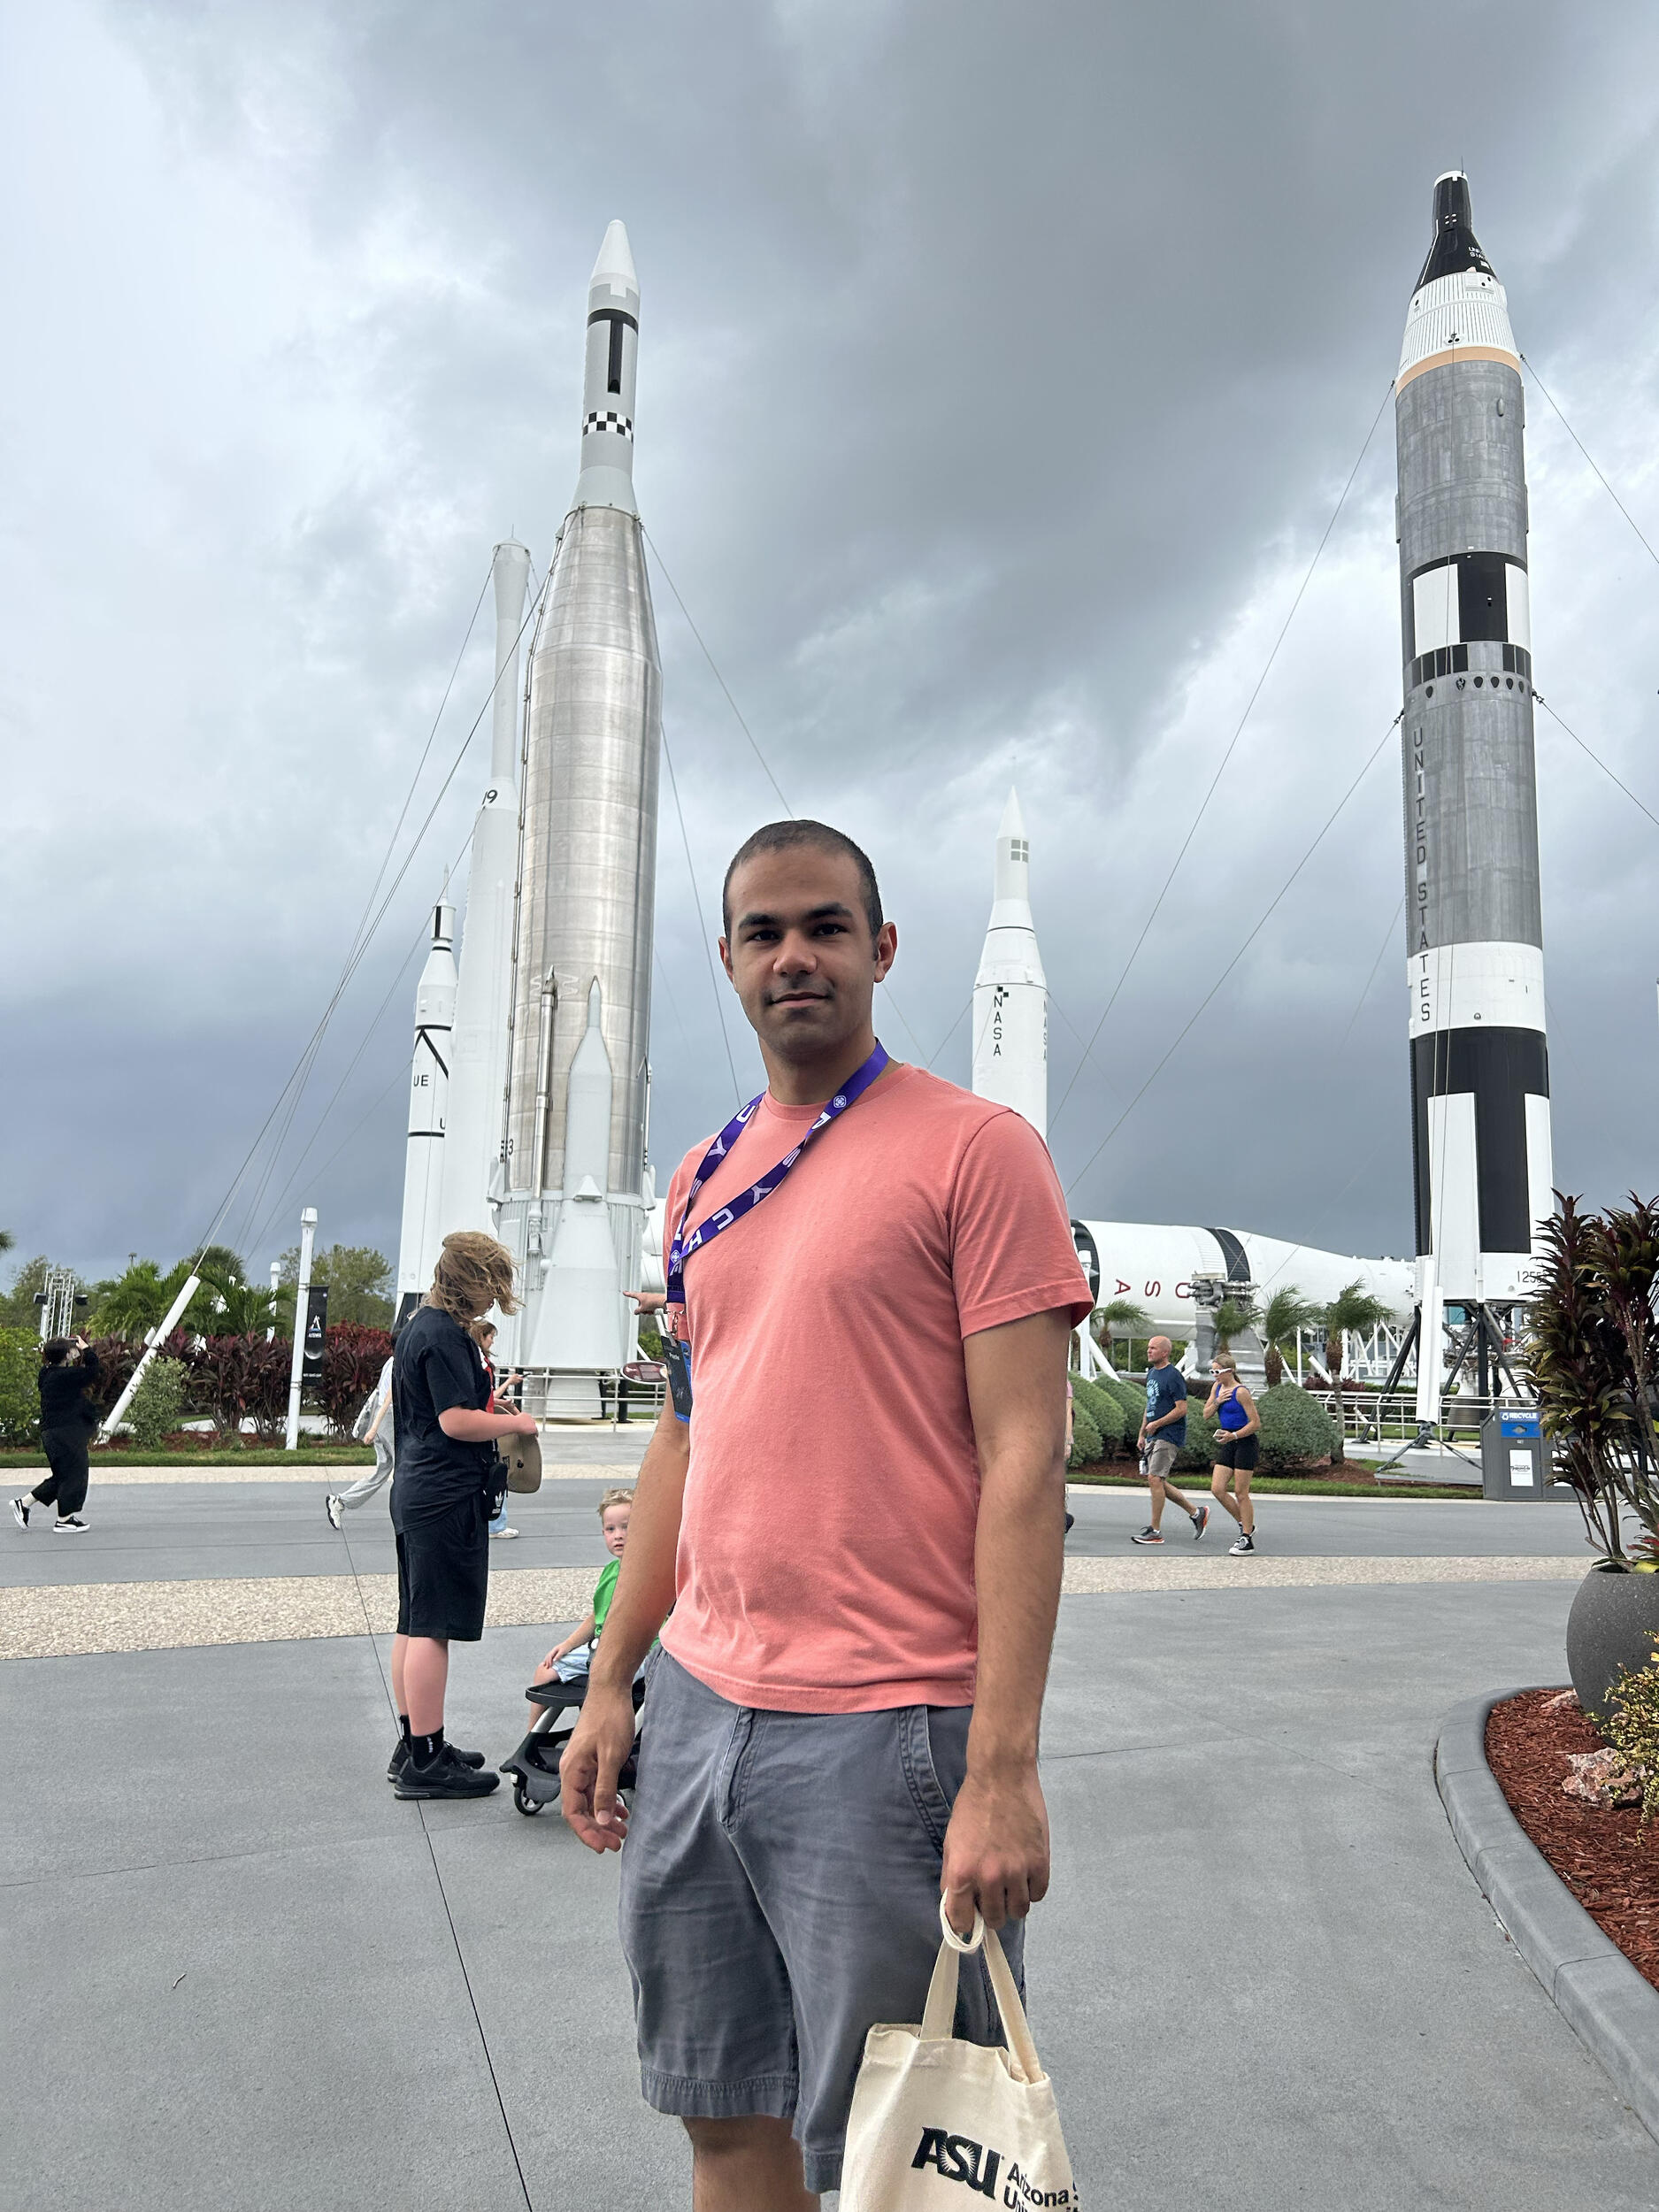 A man standing in front of rockets